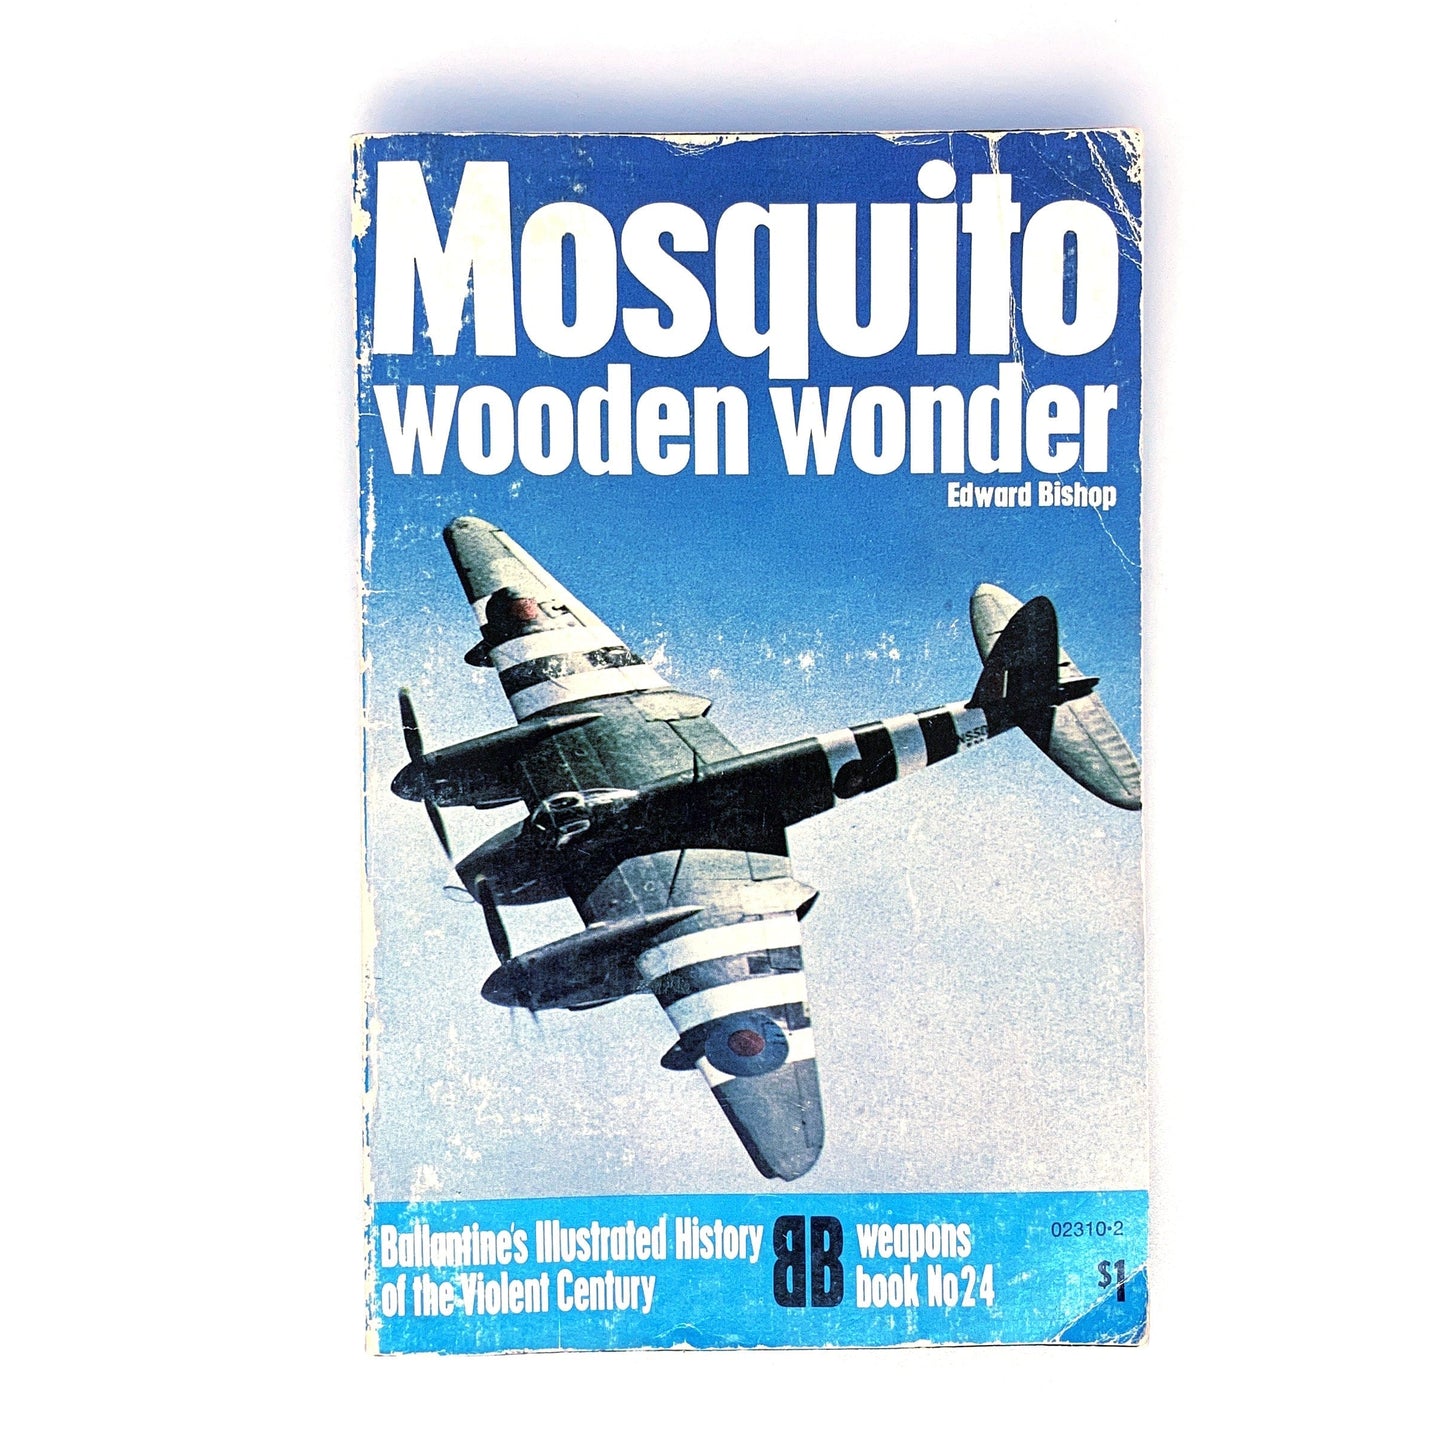 Ballantines Illustrated History of the Violent Century - Mosquito Wooden Wonder